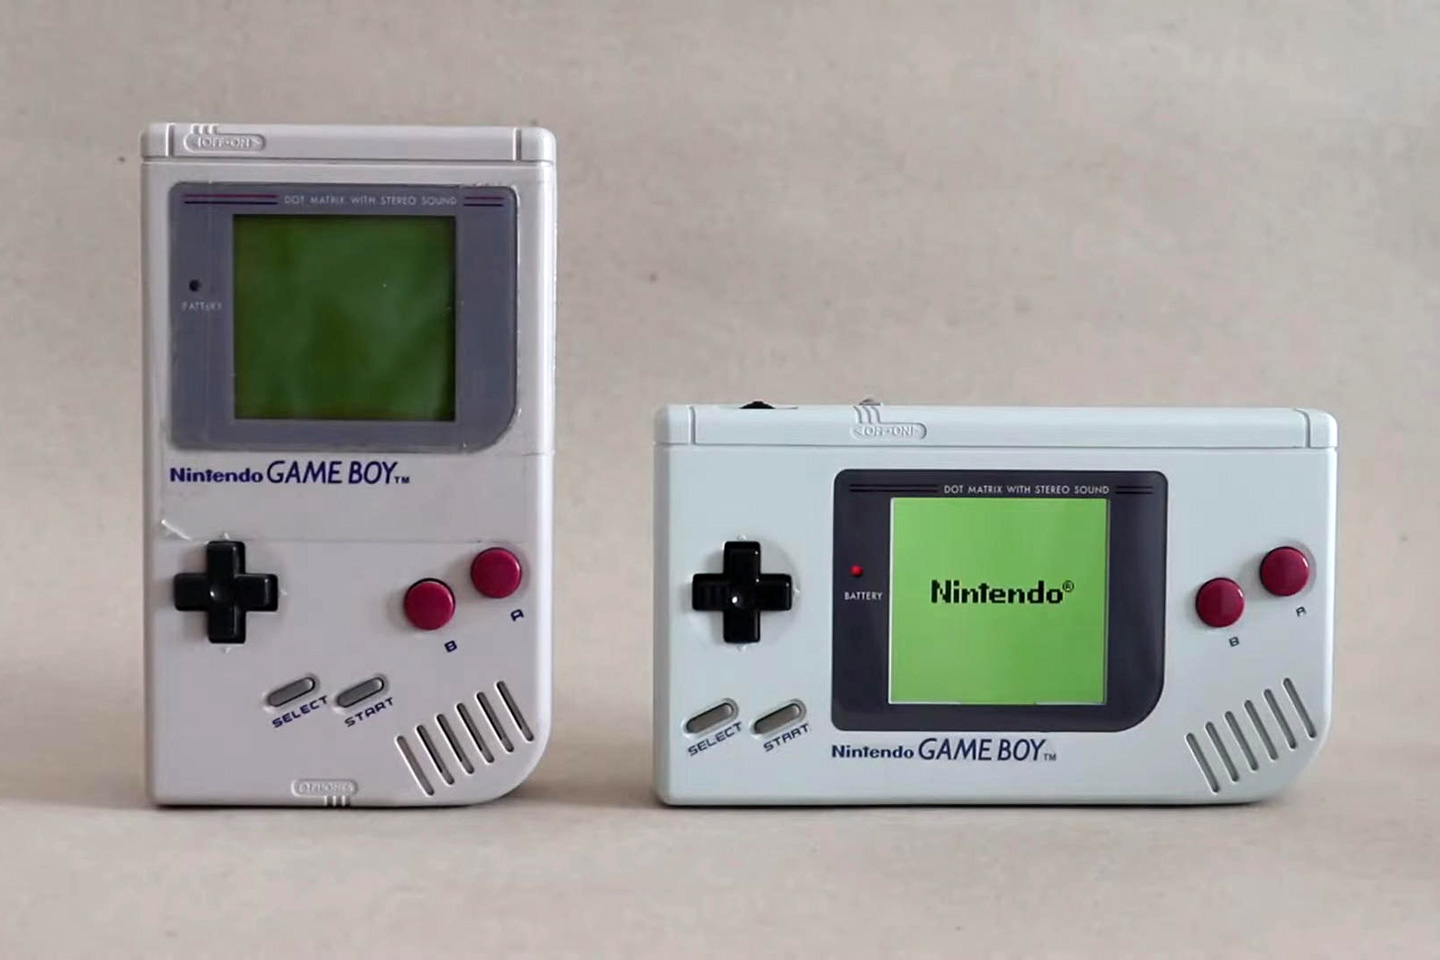 This parallel-universe 'landscape' Game Boy Classic feels like the 